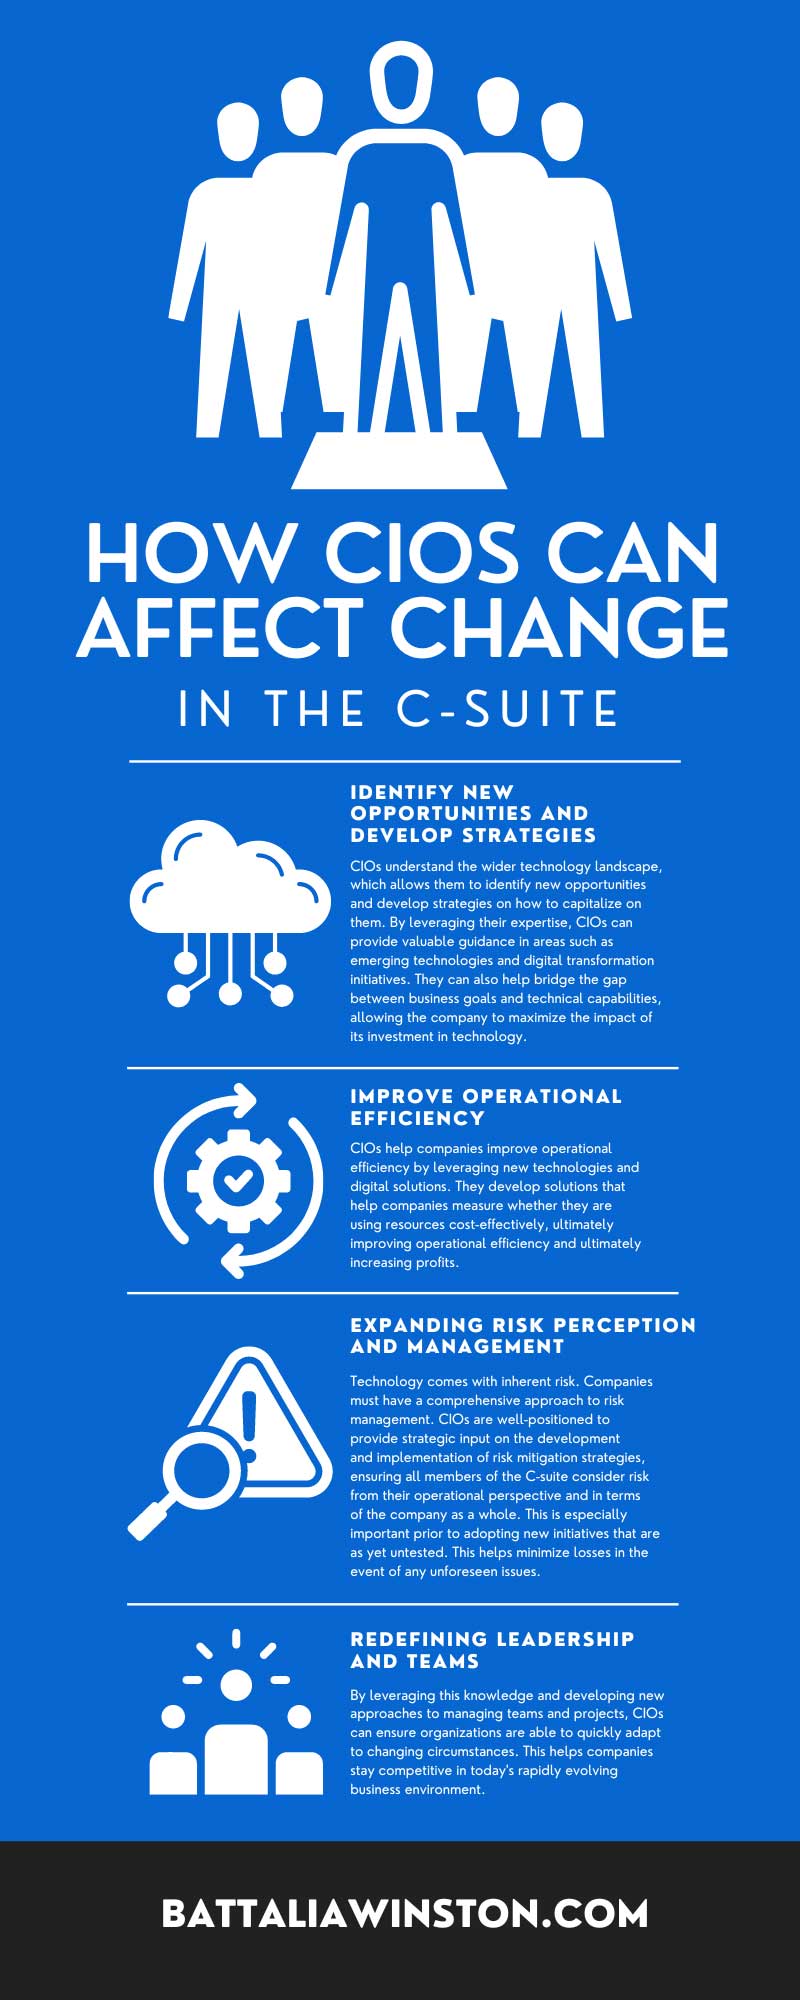 How CIOs Can Affect Change in the C-Suite